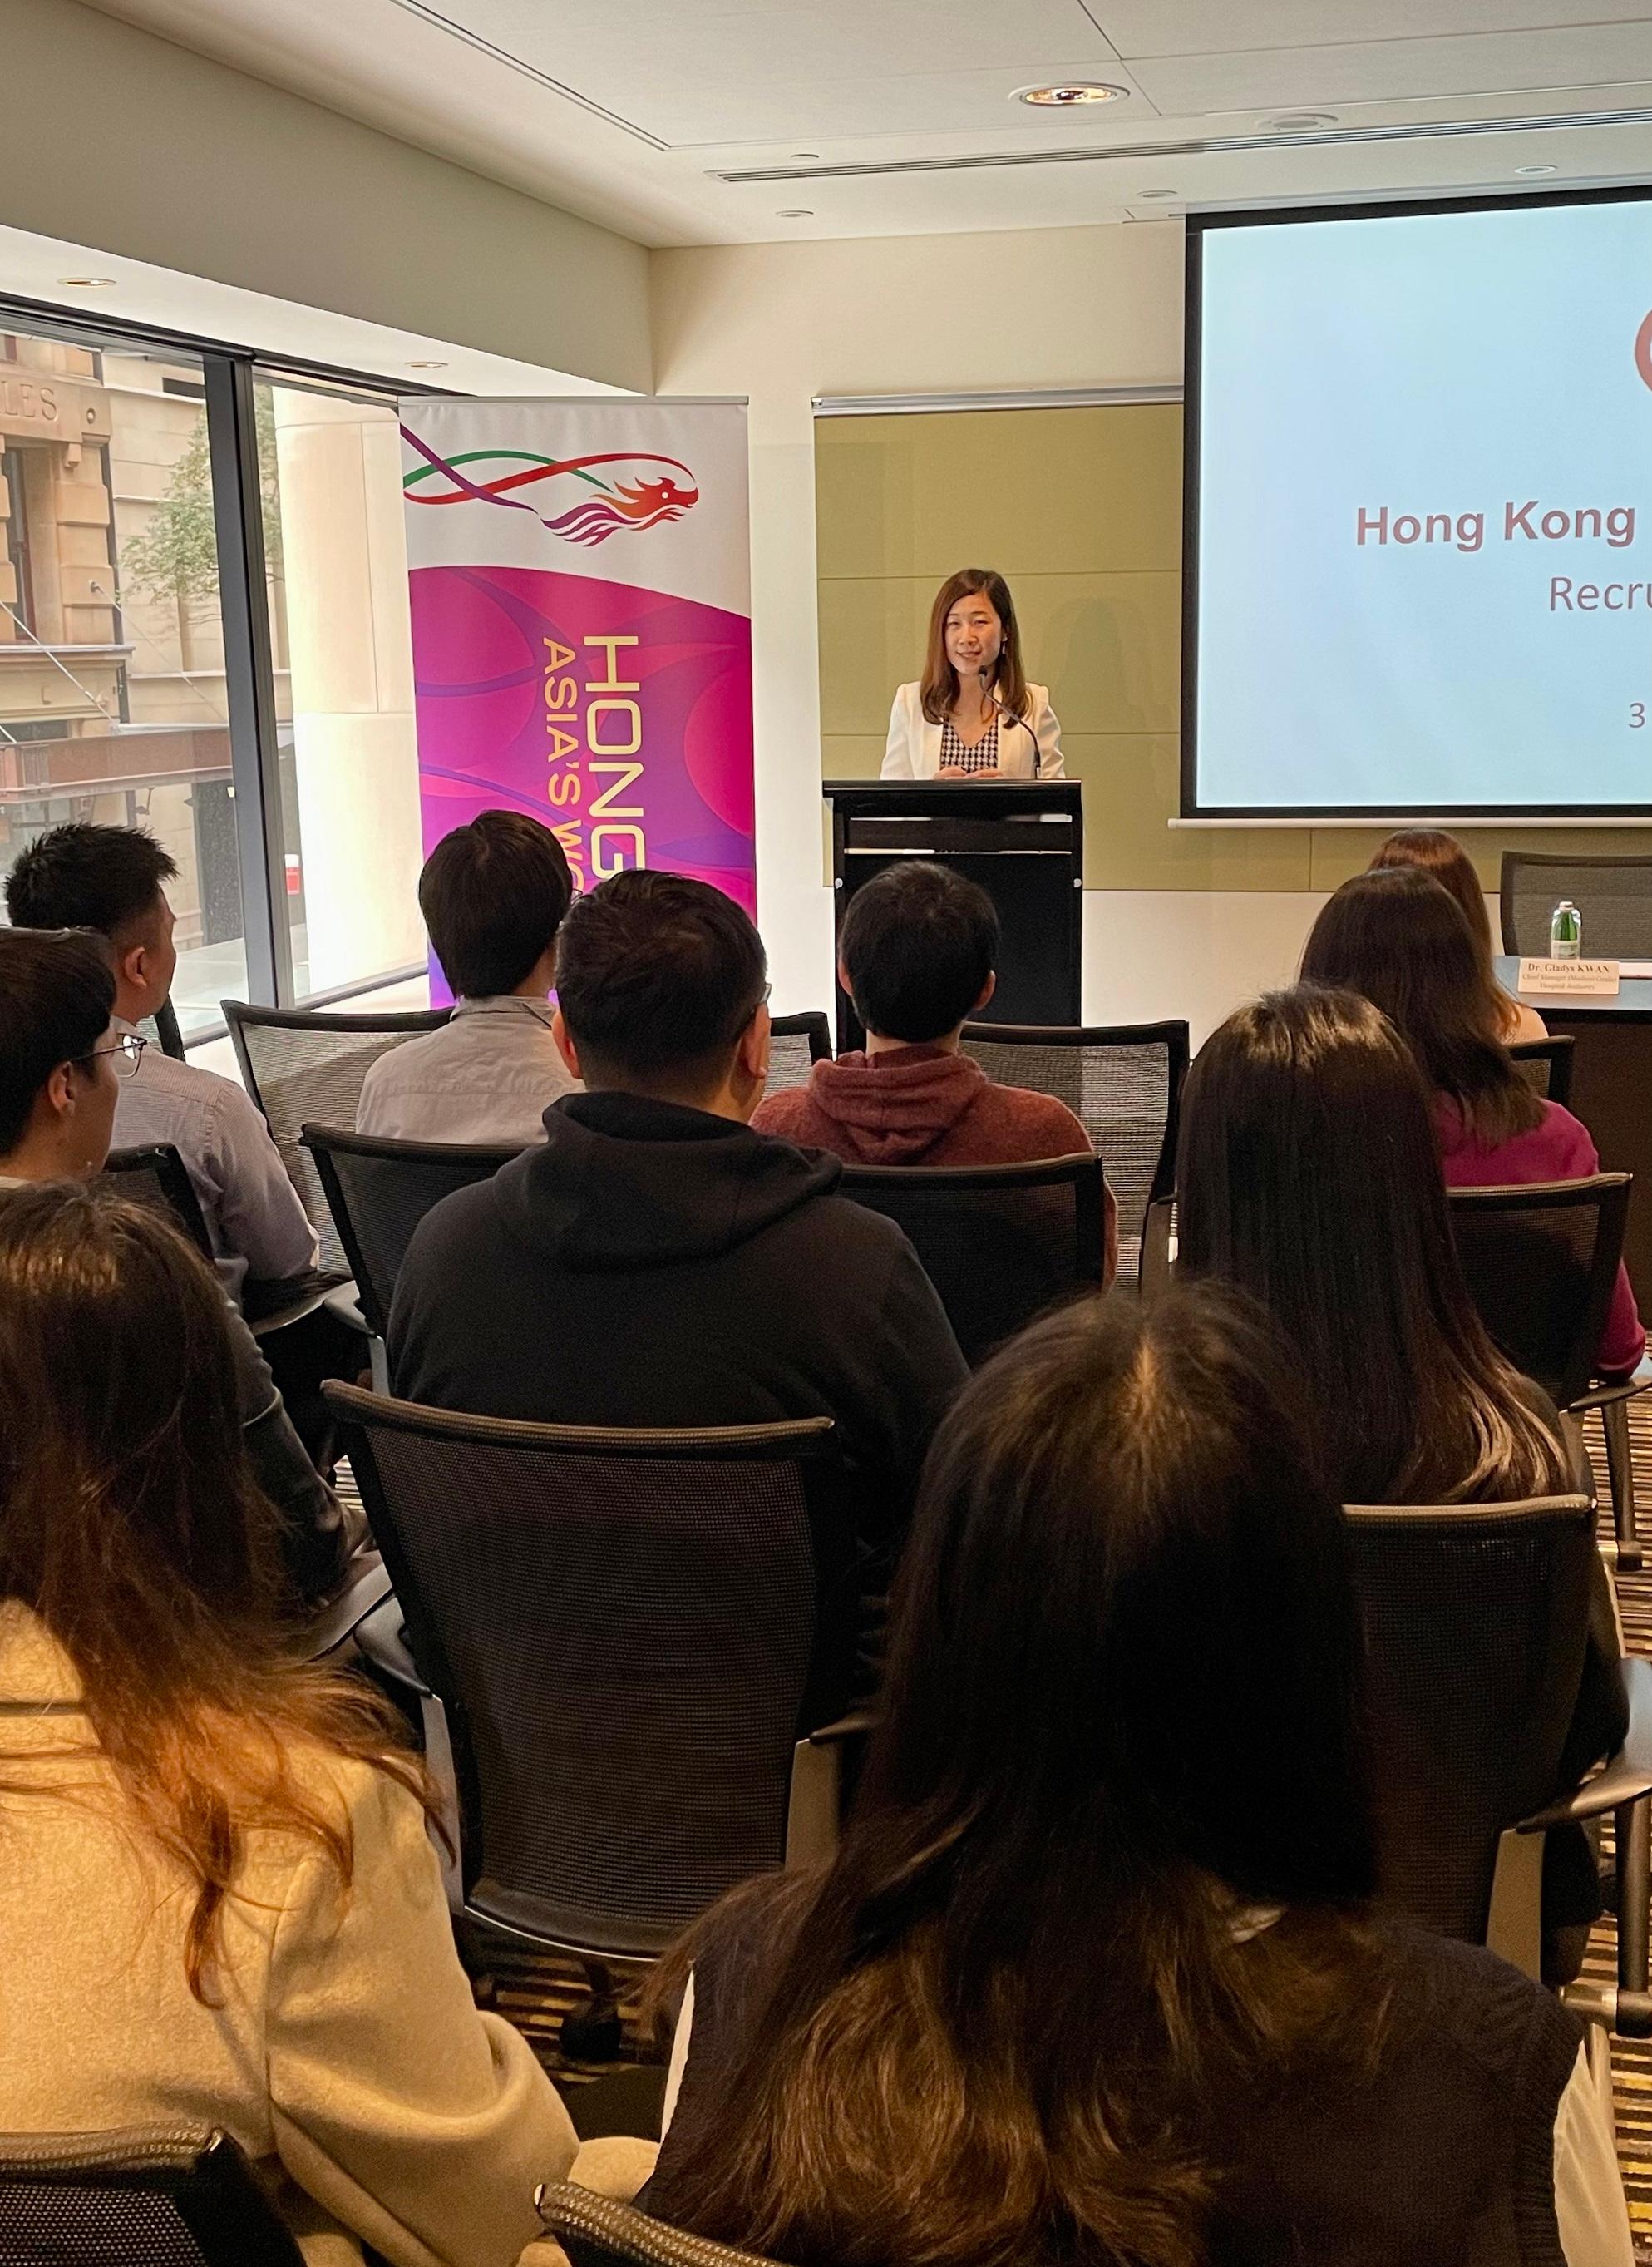 The Director of the Hong Kong Economic and Trade Office, Sydney, Miss Trista Lim, delivers welcoming remarks at the Recruitment Day for non-locally trained doctors held in Sydney, Australia today (June 3) to promote the various initiatives of the Government to attract top talents worldwide to work in Hong Kong.